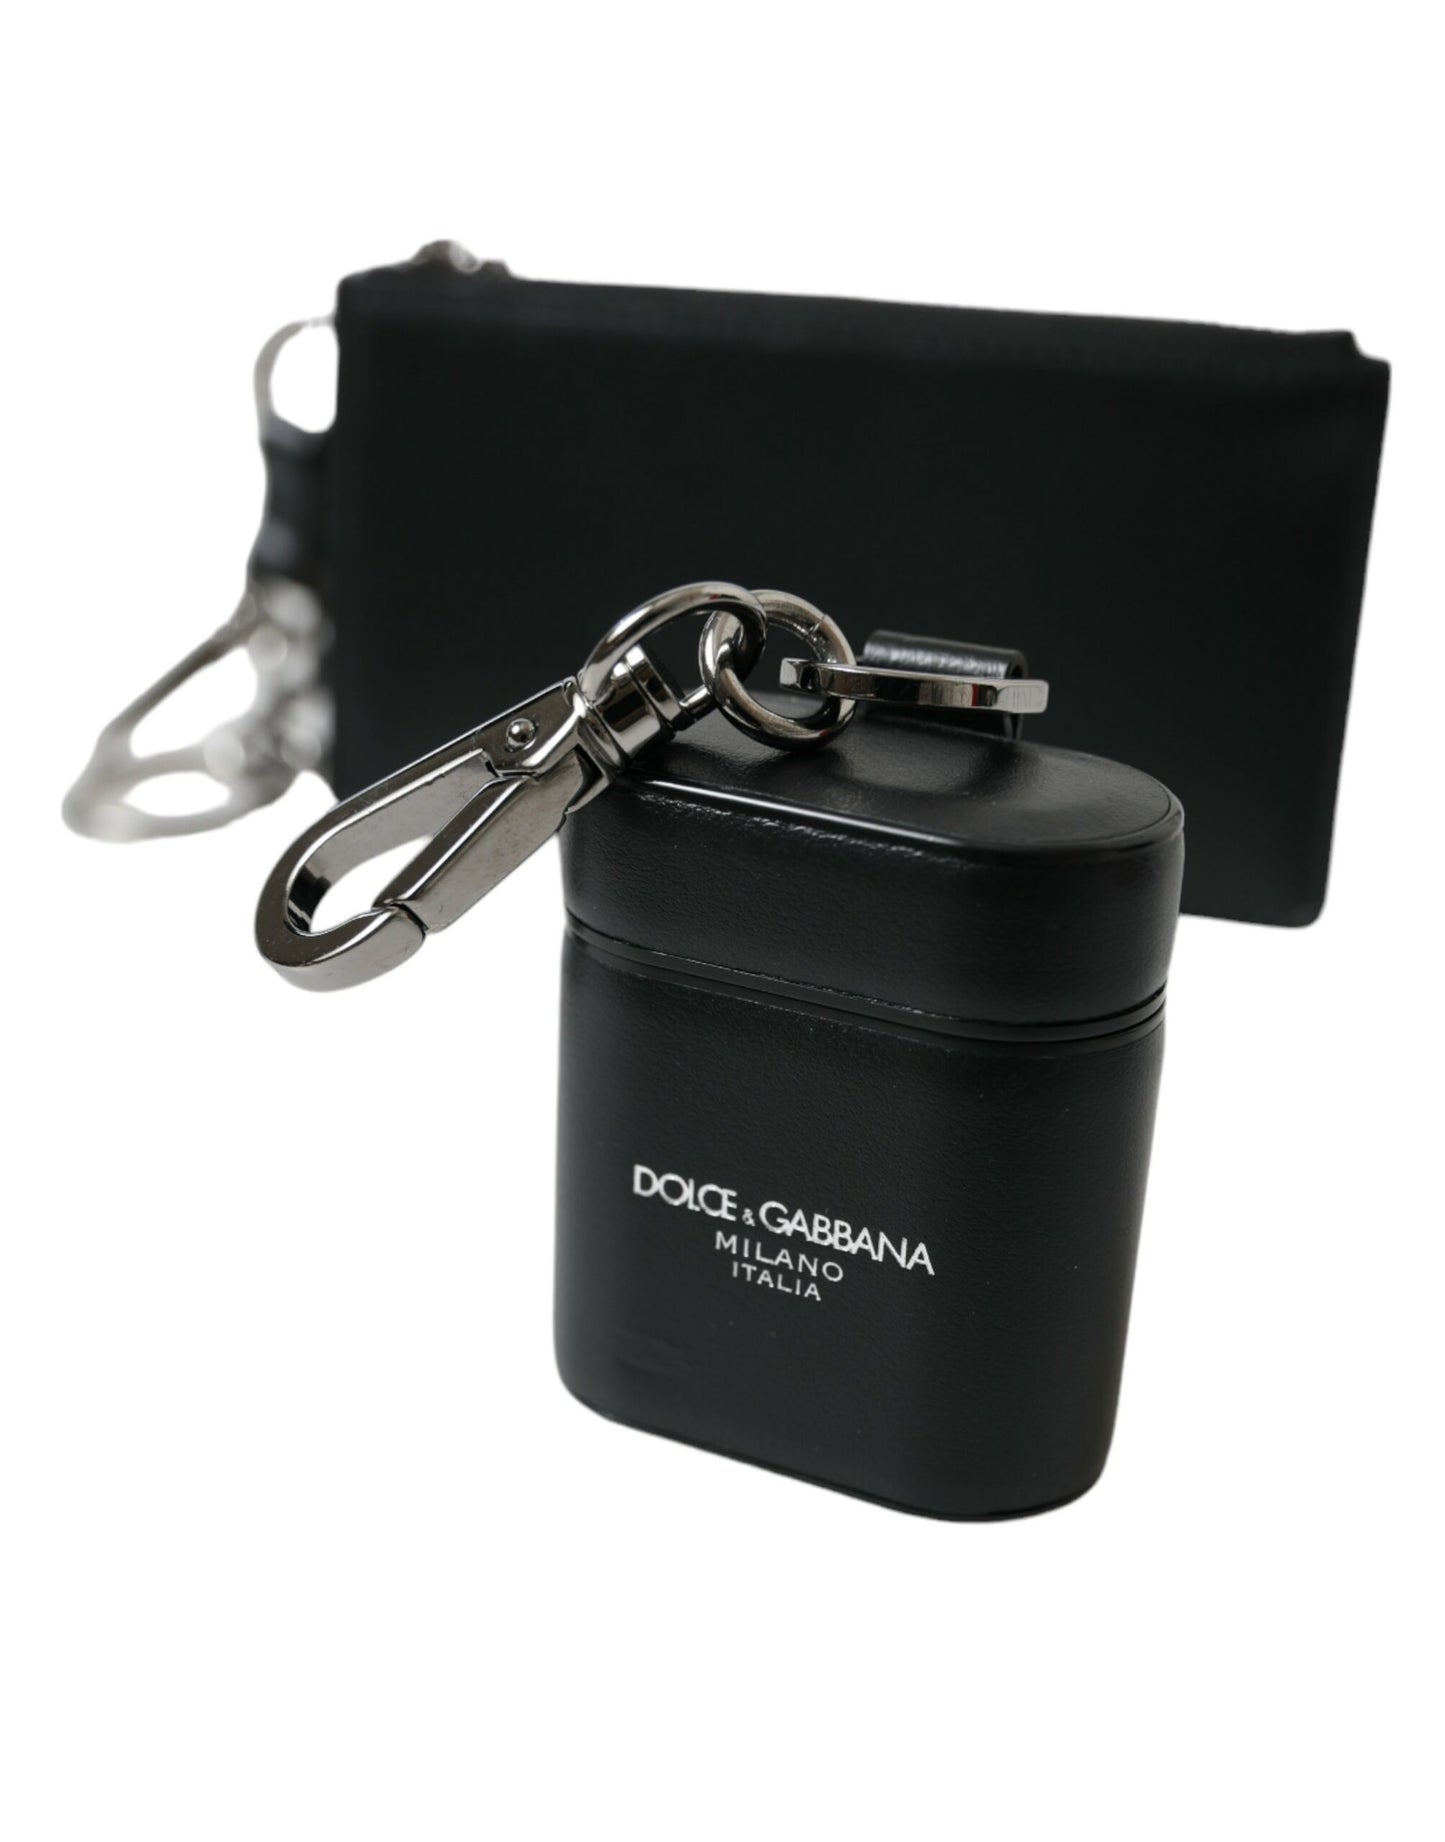 Dolce & Gabbana Black Leather Wallet and AirPods Case